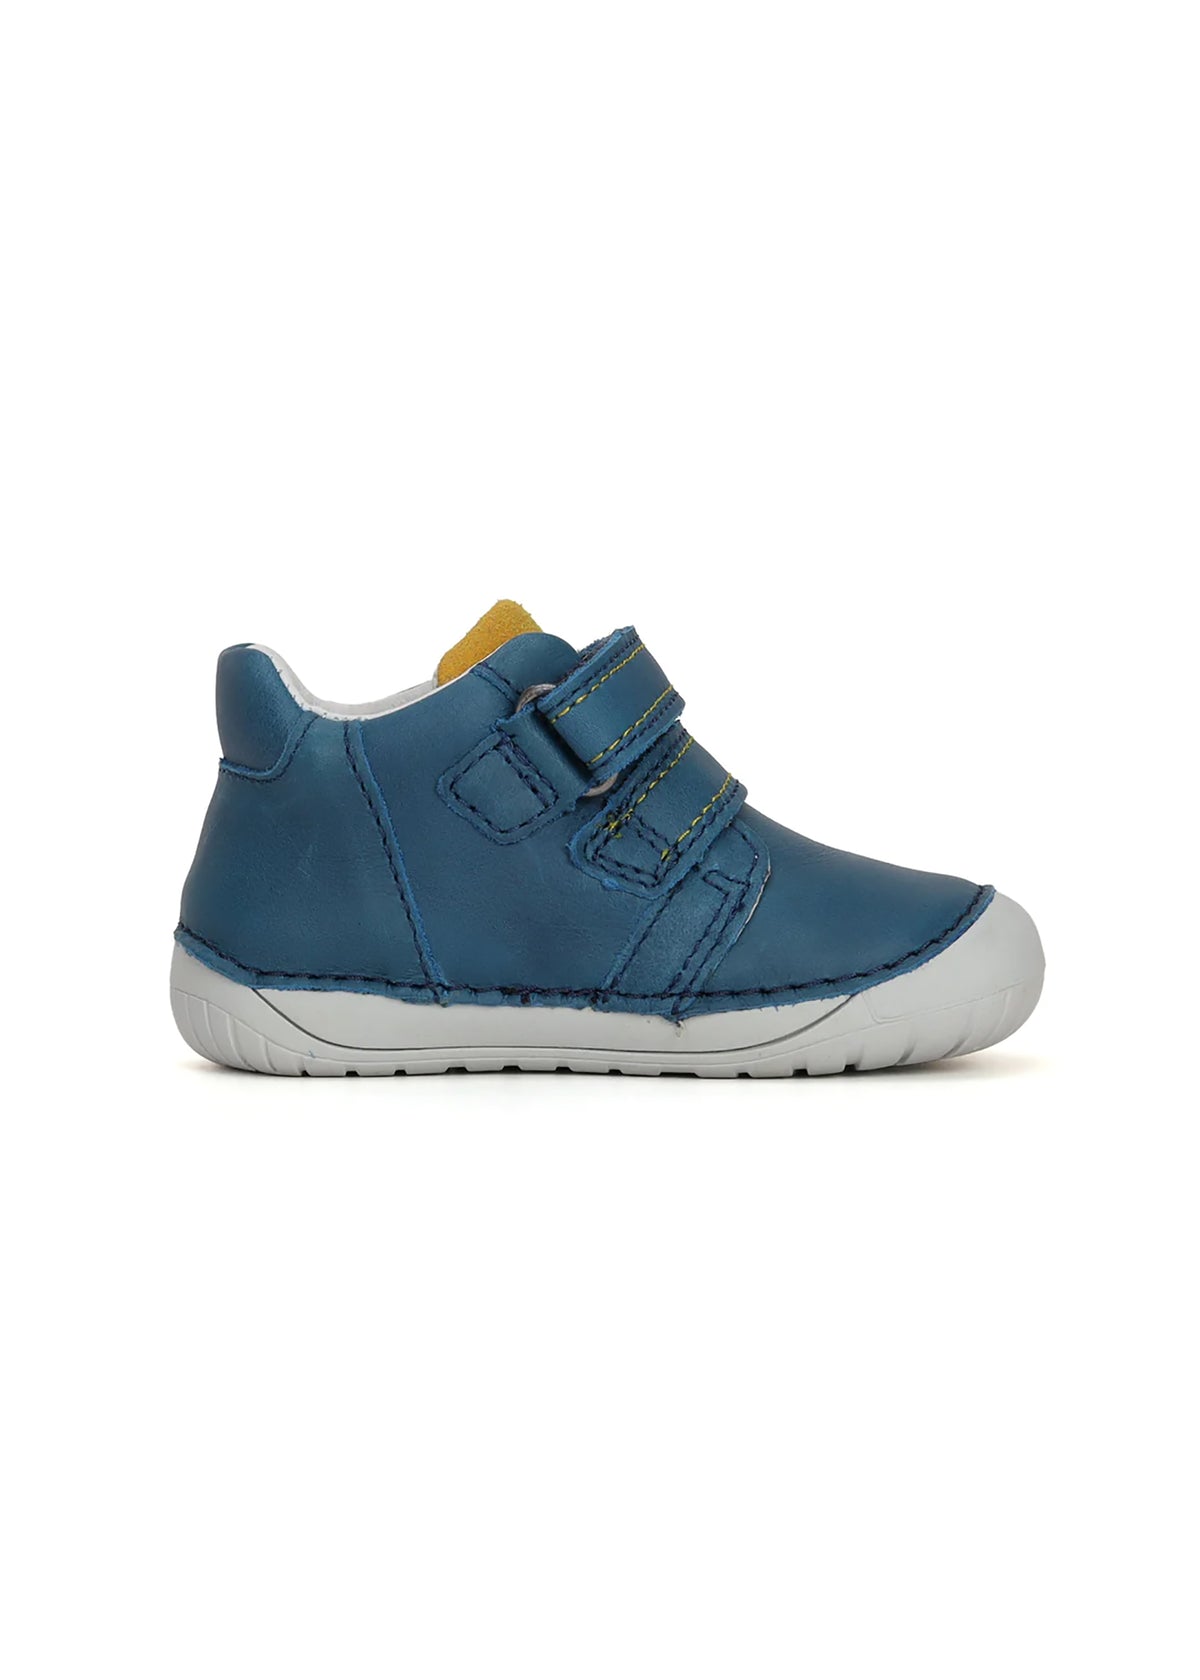 Children's first step shoes - blue leather, yellow truck